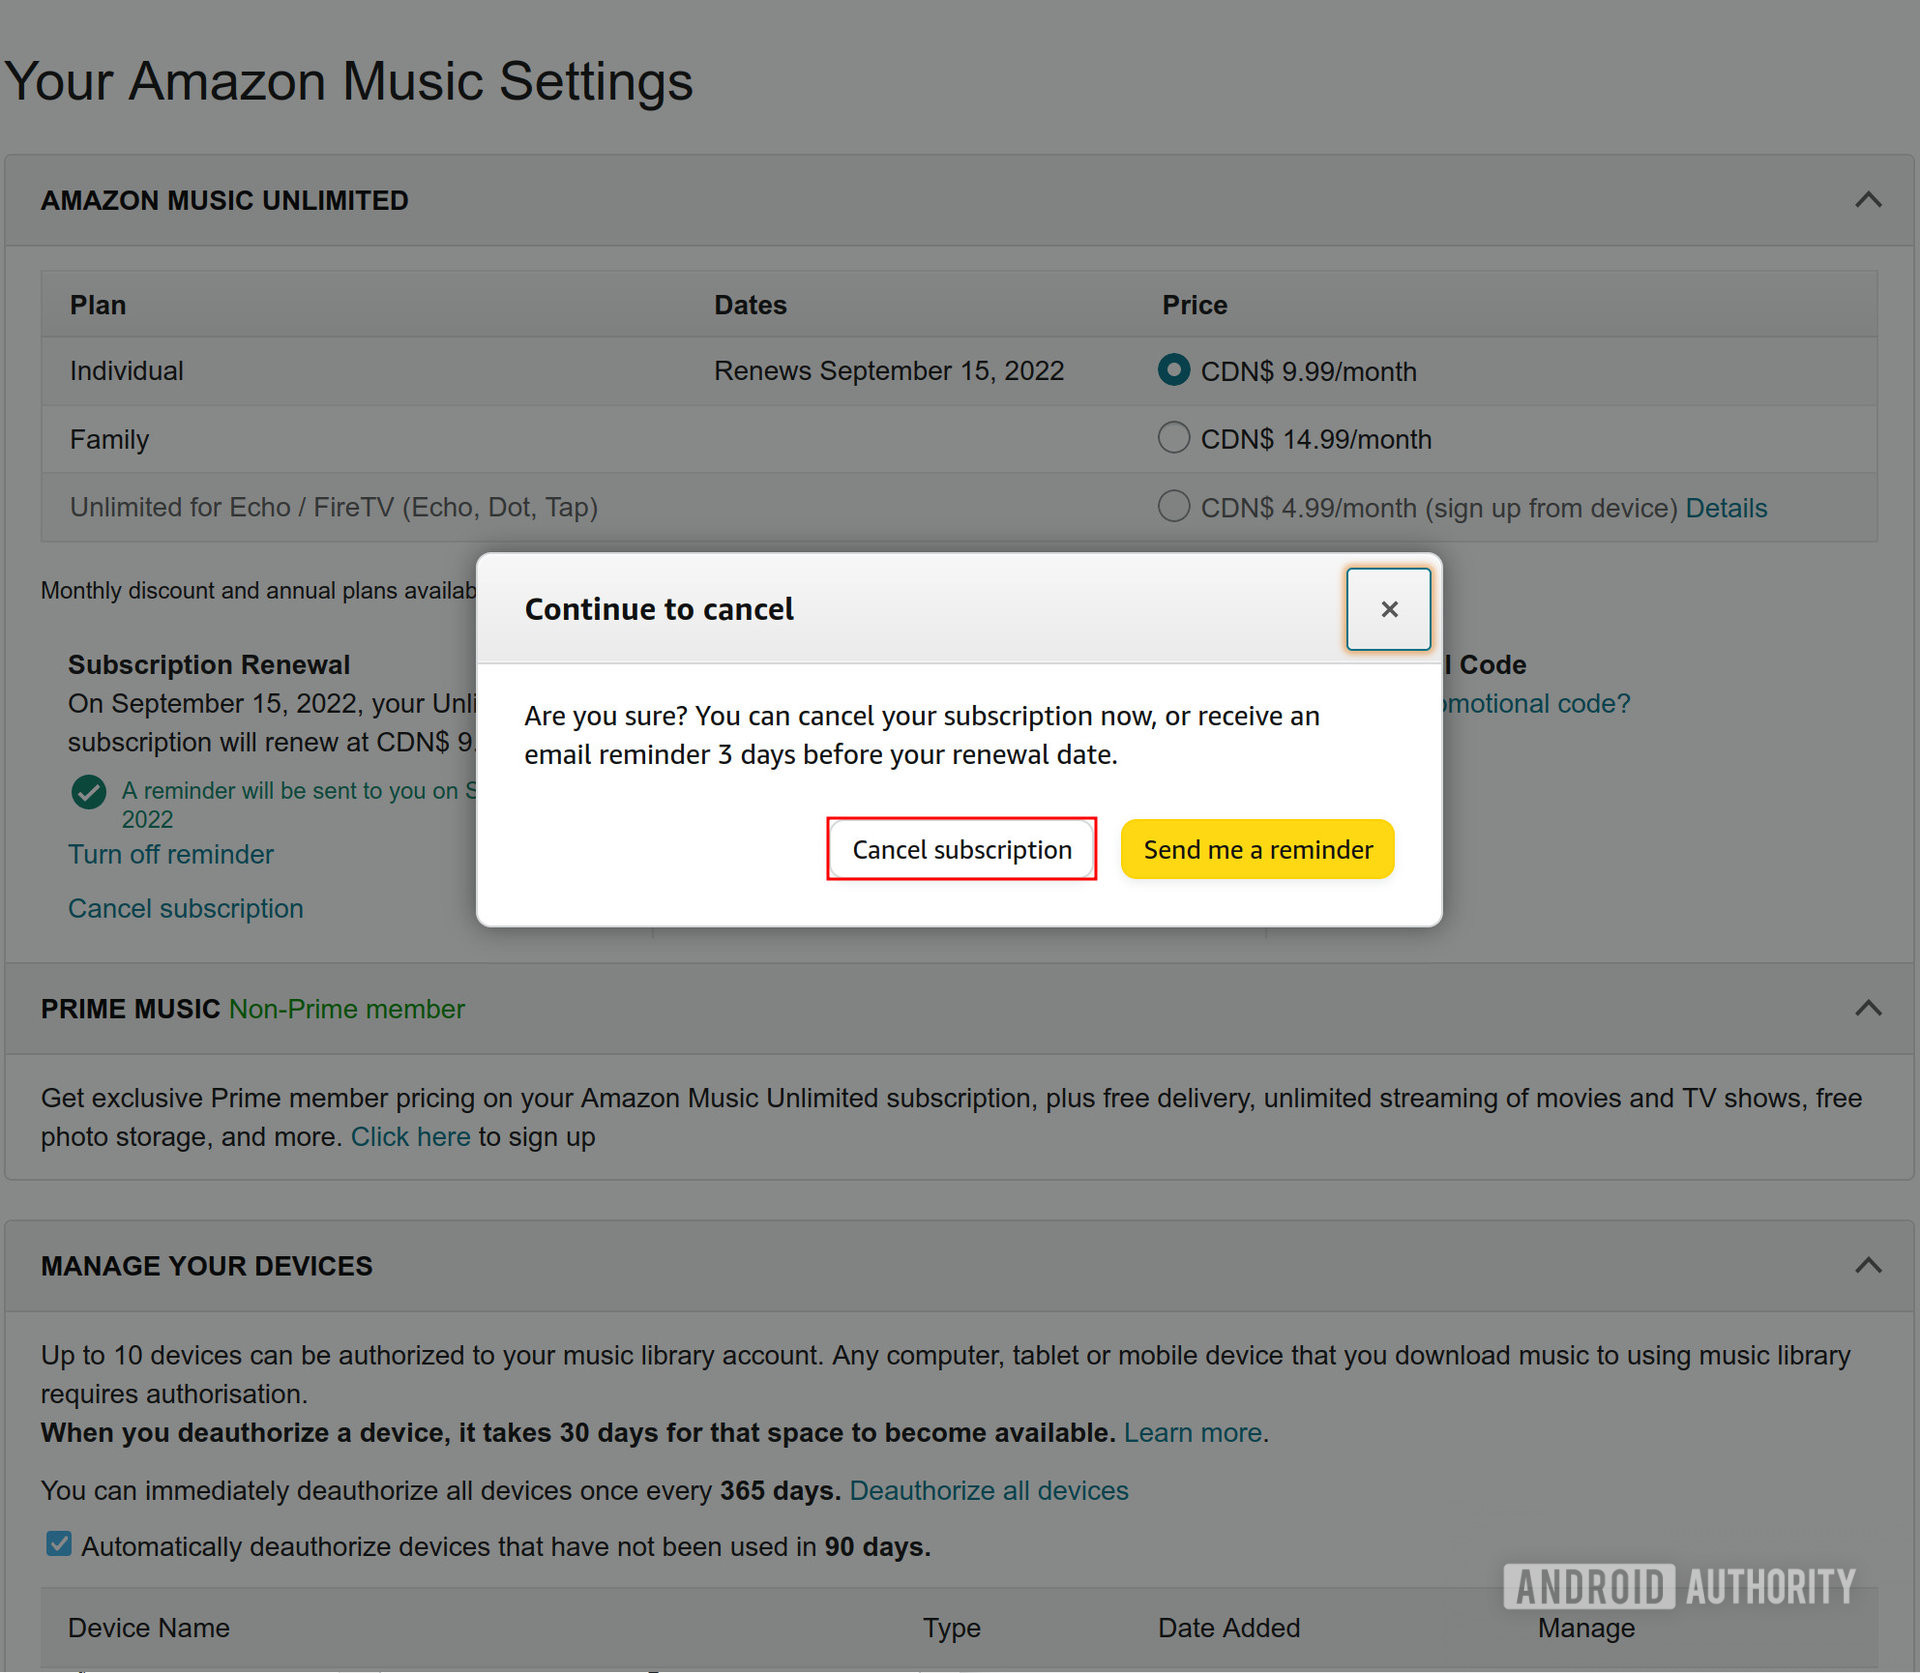 A pop-up on the Amazon Music settings webpage asking to confirm the cancellation of a subscription with a red box highlighting the 'Cancel subscription' option.